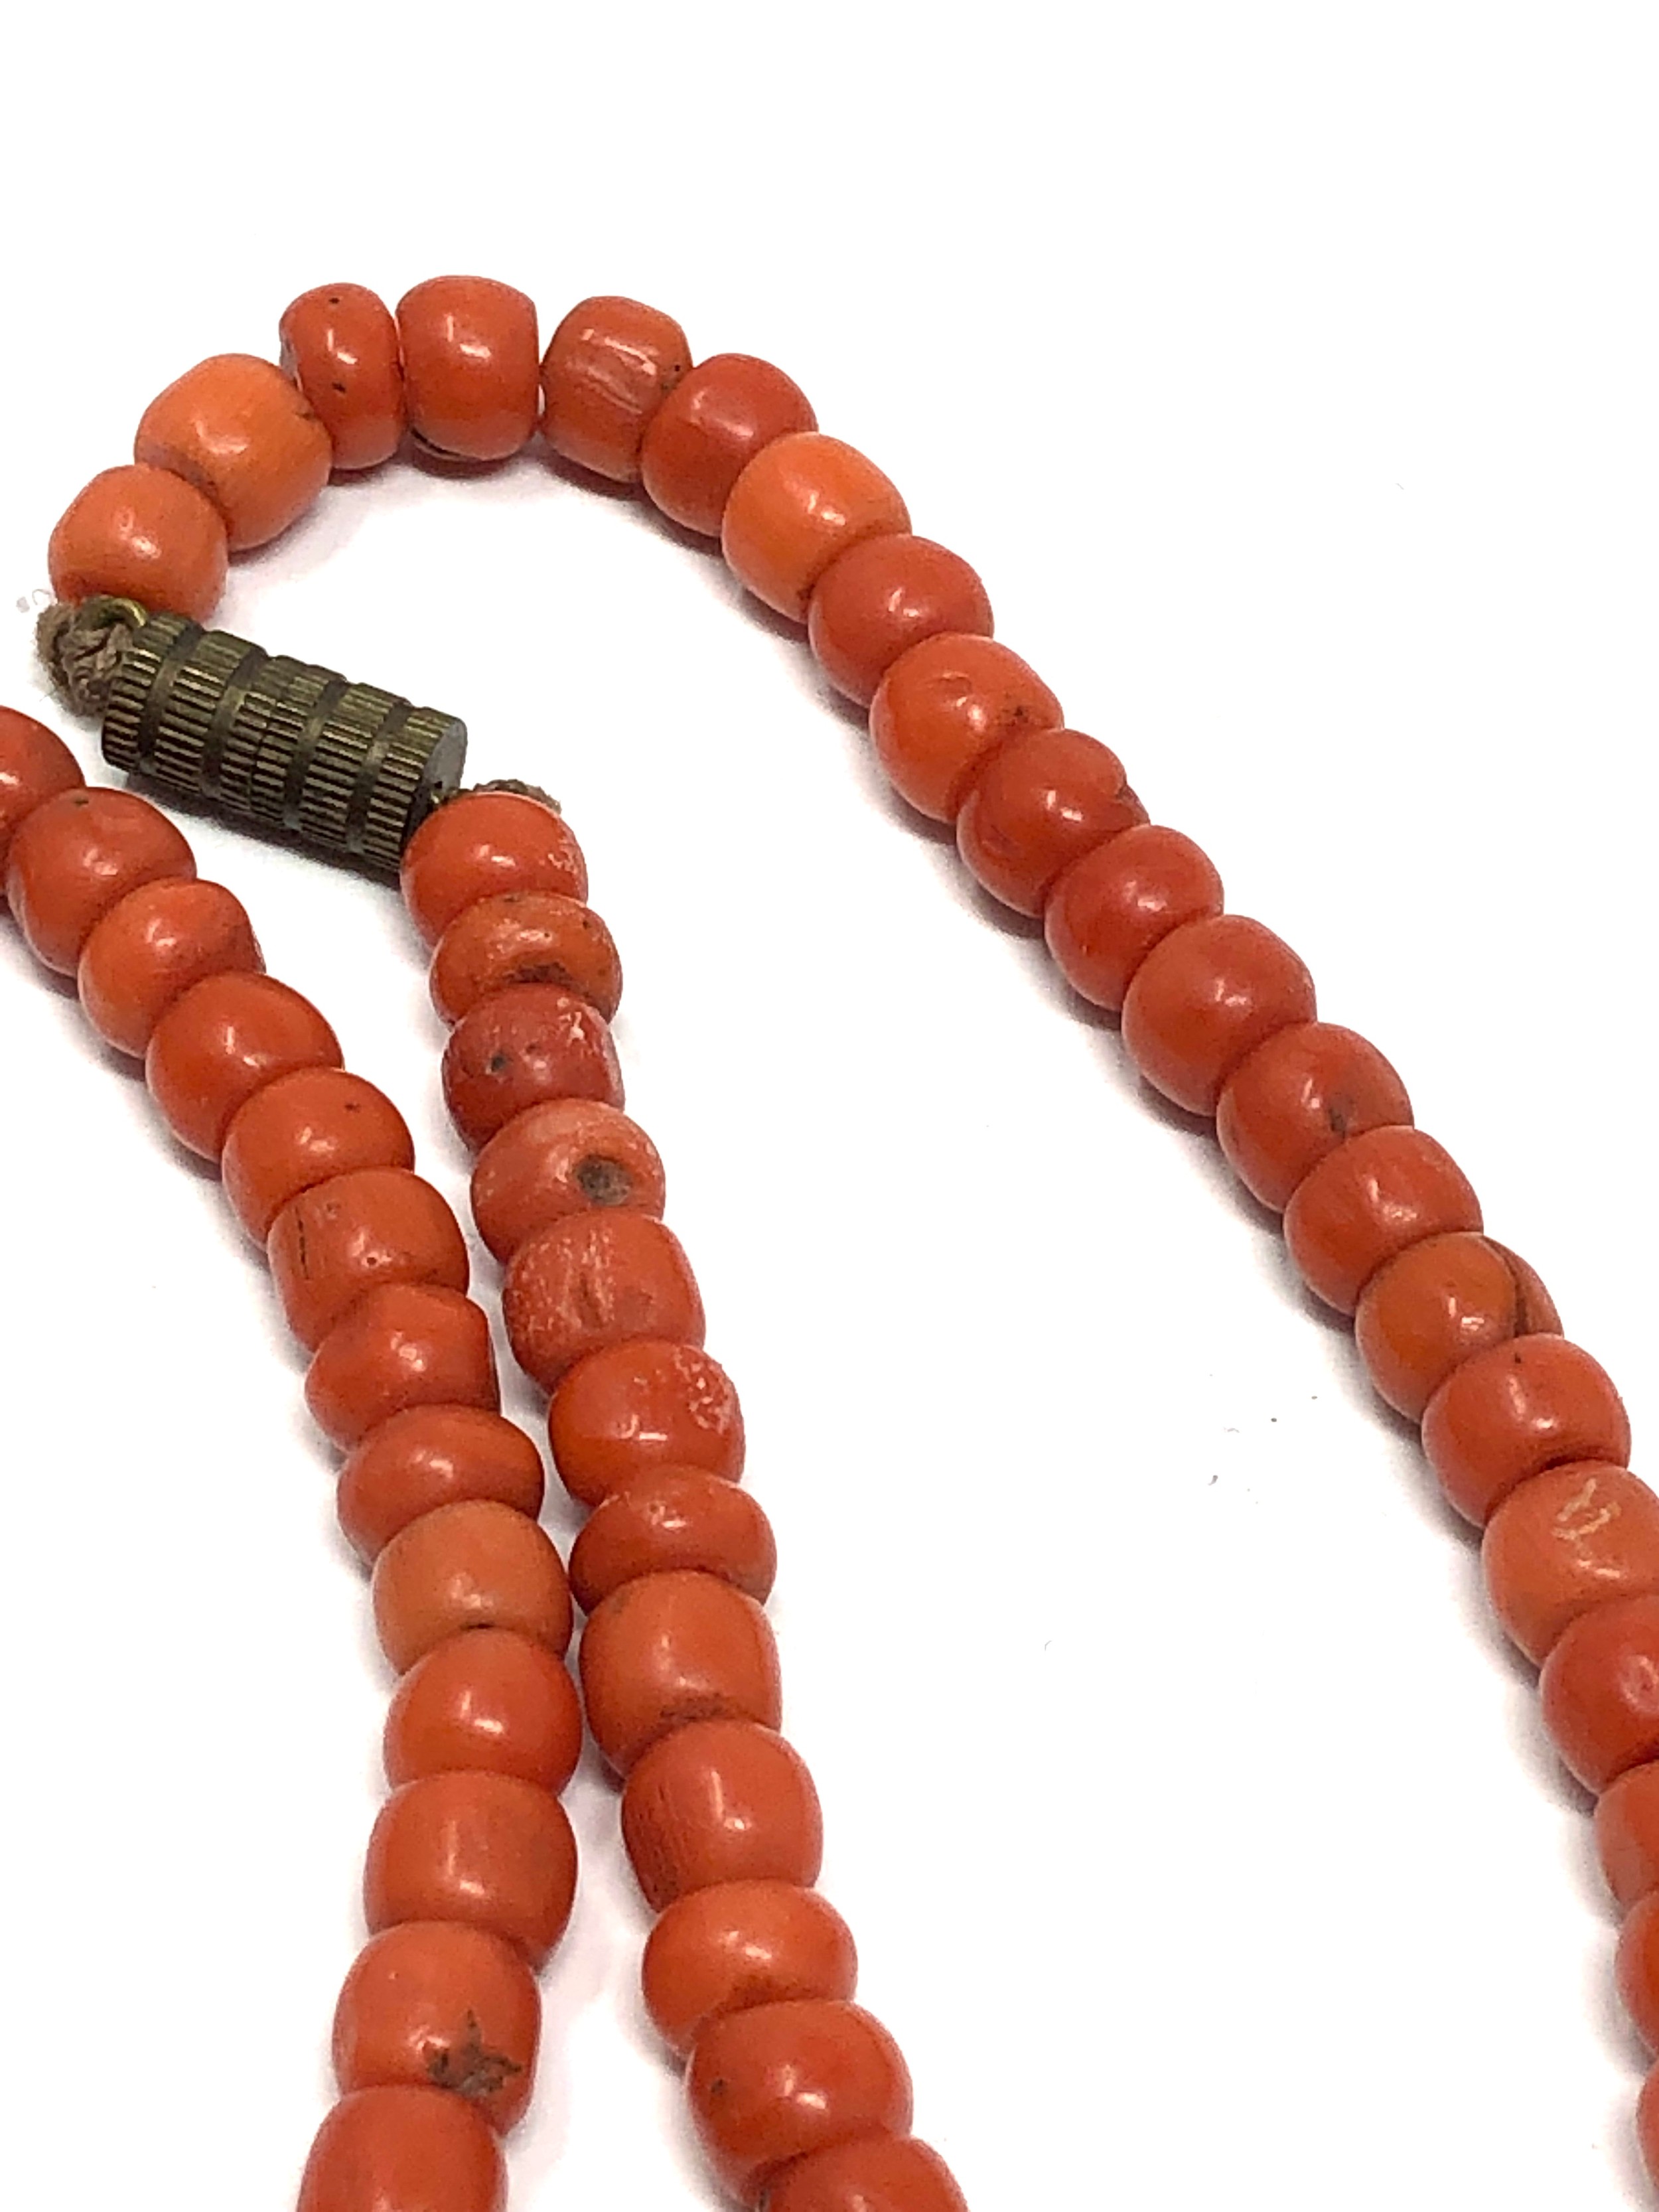 Fine Antique red coral necklace average size of beads approx 6.mm weight 25g later metal clasp - Bild 4 aus 4